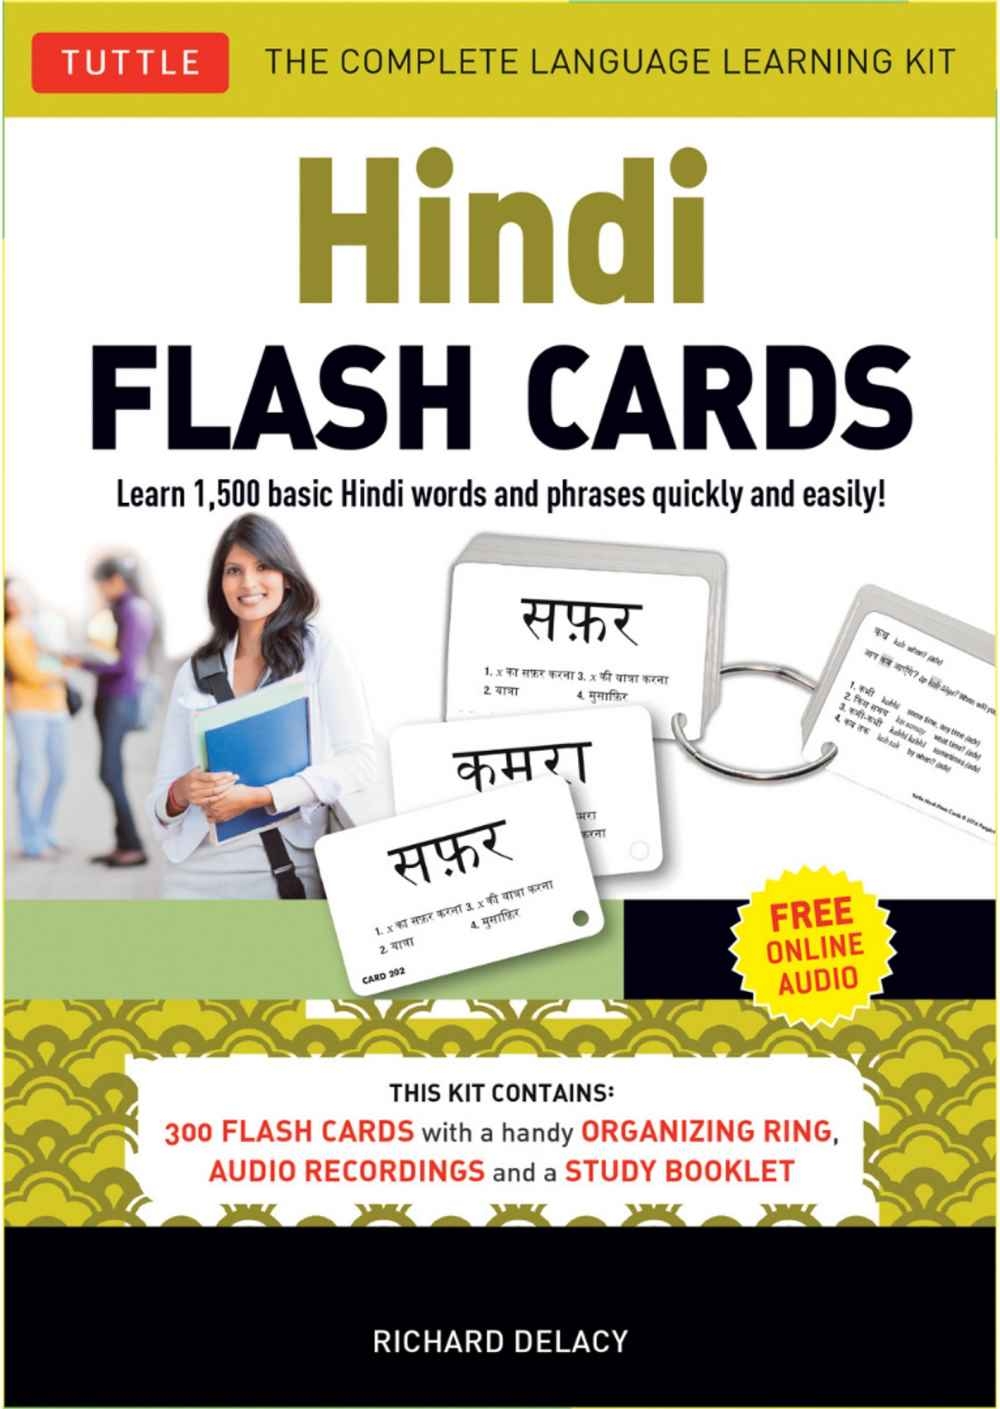 Hindi Flash Cards Kit: Learn 1,500 Basic Hindi Words and Phrases Quickly and Easily!